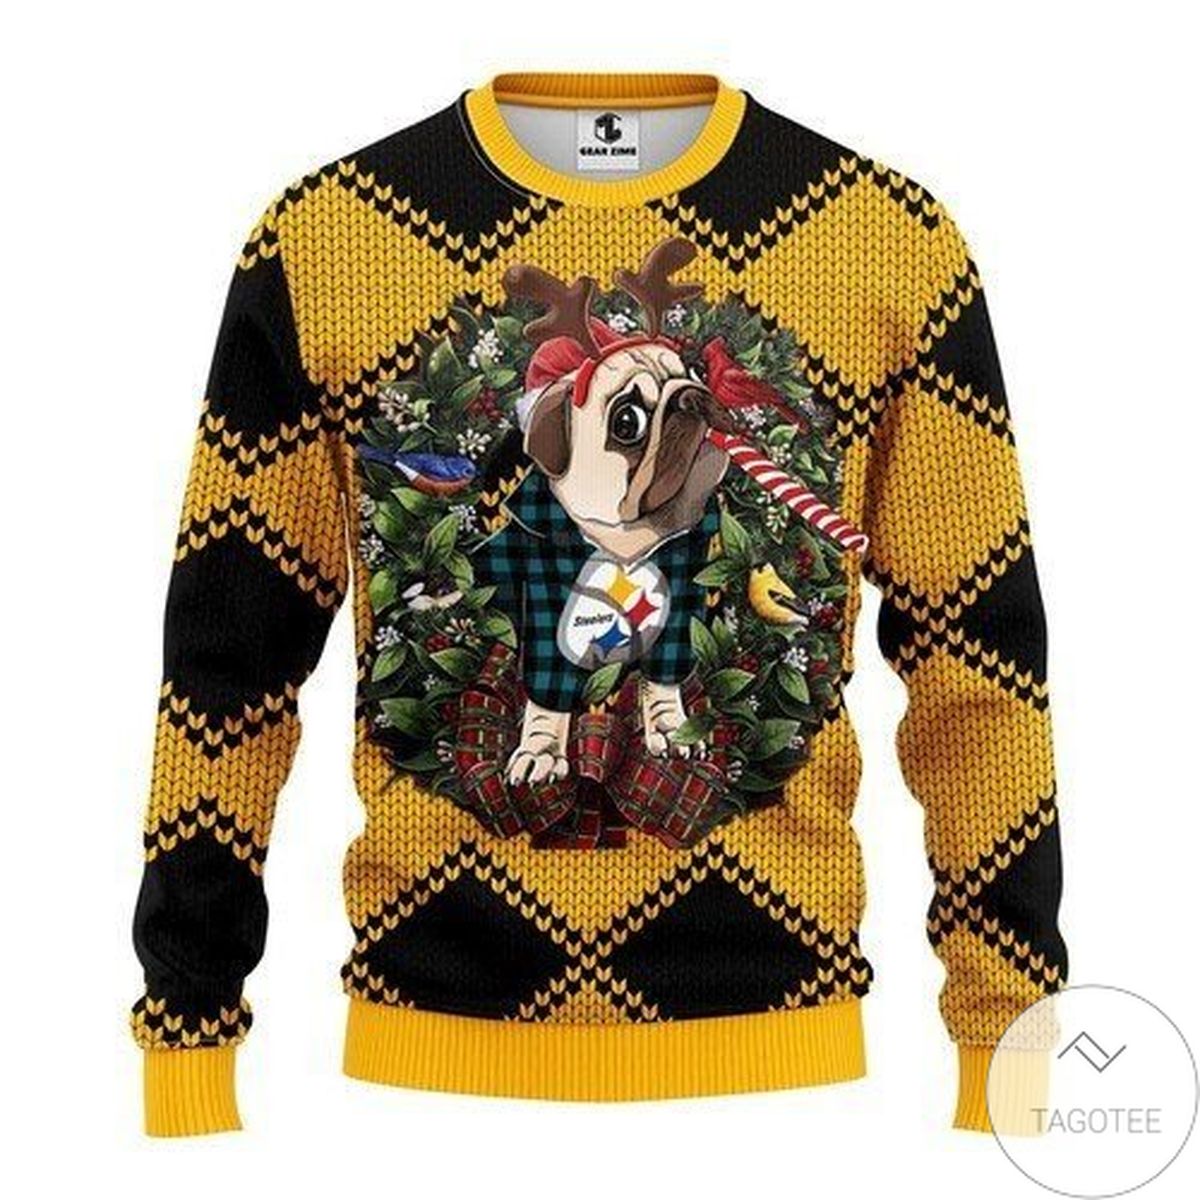 Pittsburgh Steelers Pug Dog For Unisex Ugly Christmas Sweater